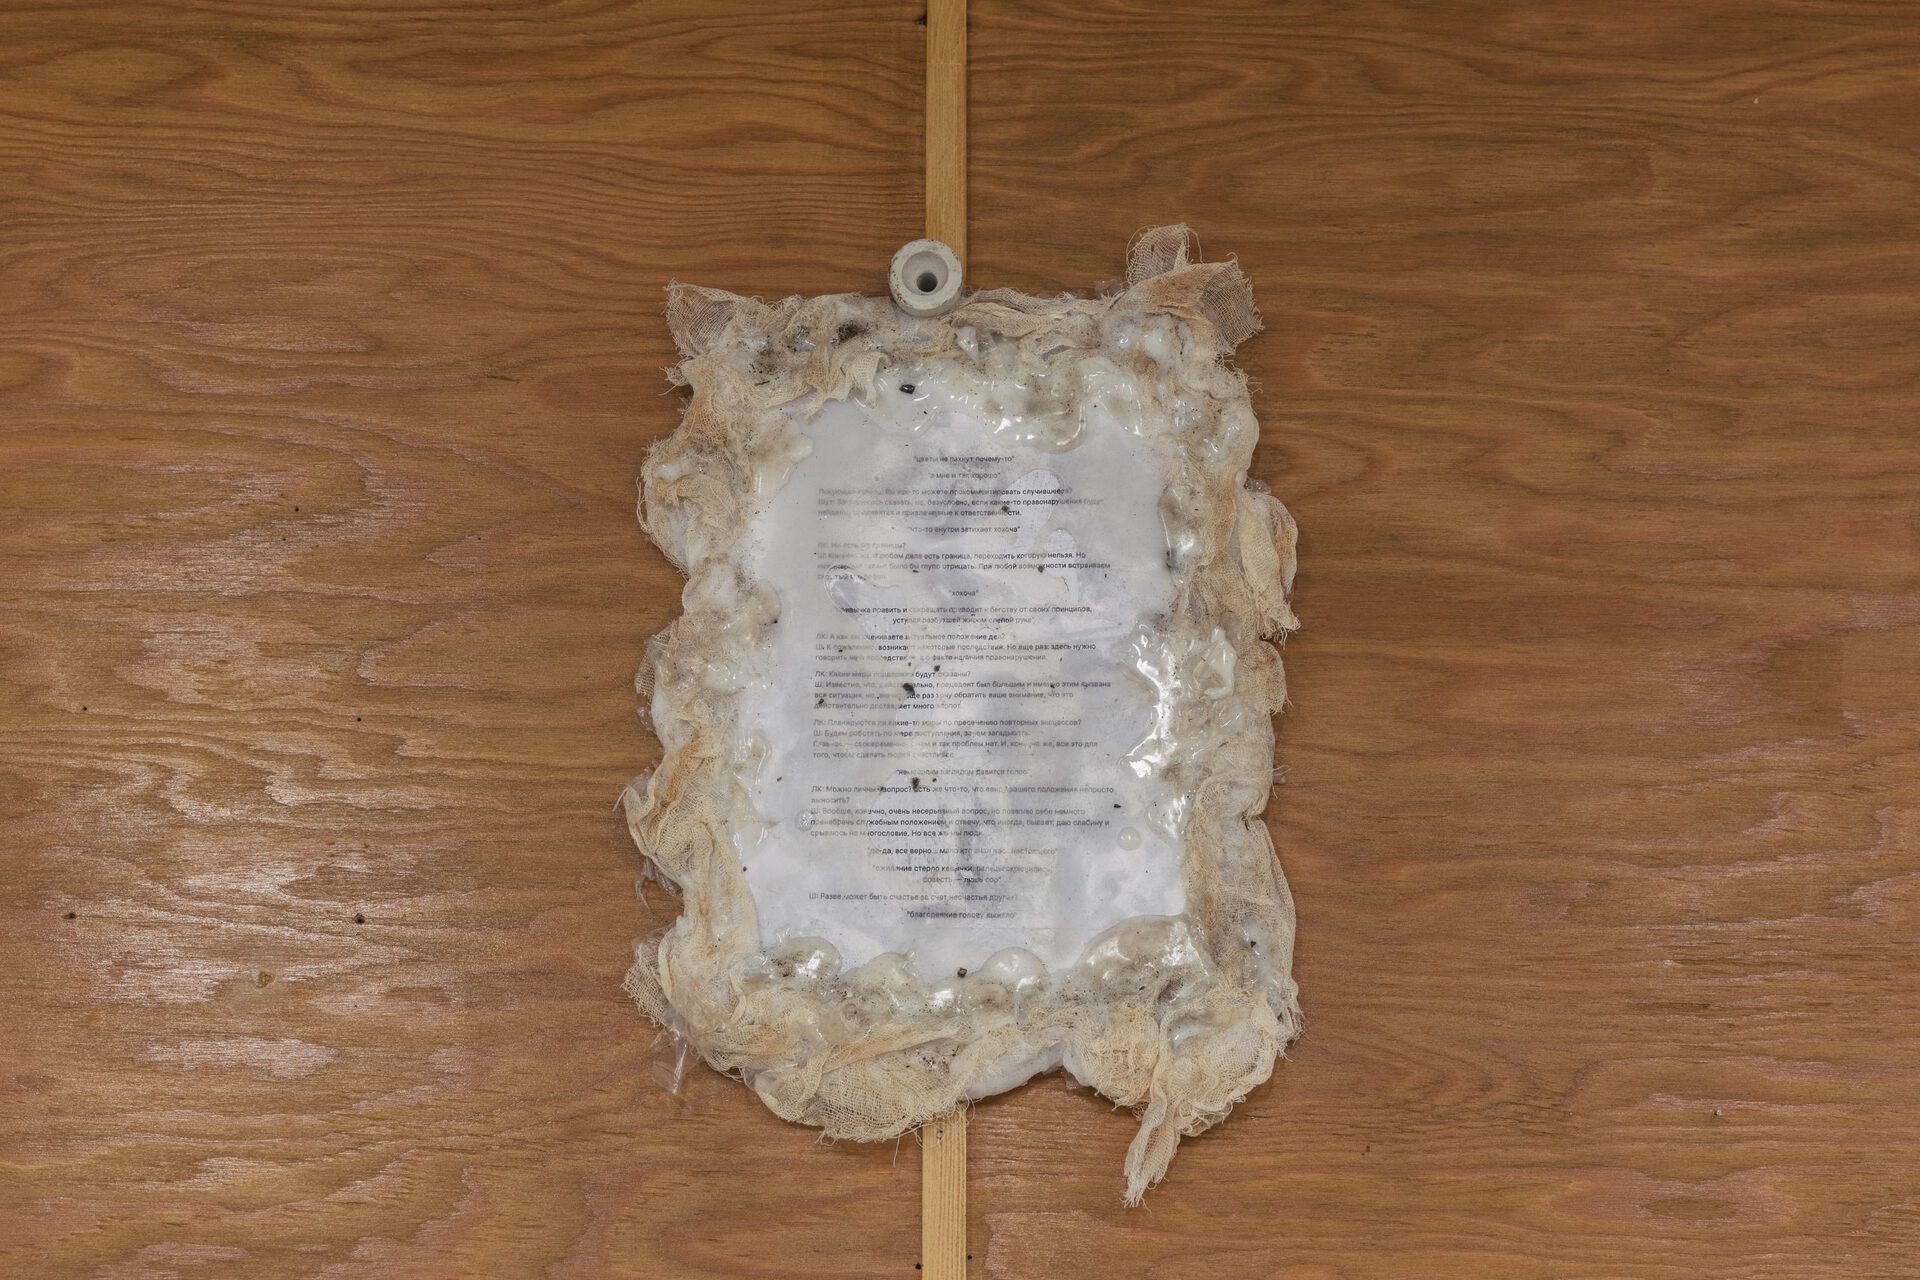 Interview. 2021, hypoallergenic silicone, A4 poetic text, cheesecloth, construction adhesive, rust, metal, ground, dust 31х41х2.5 cm